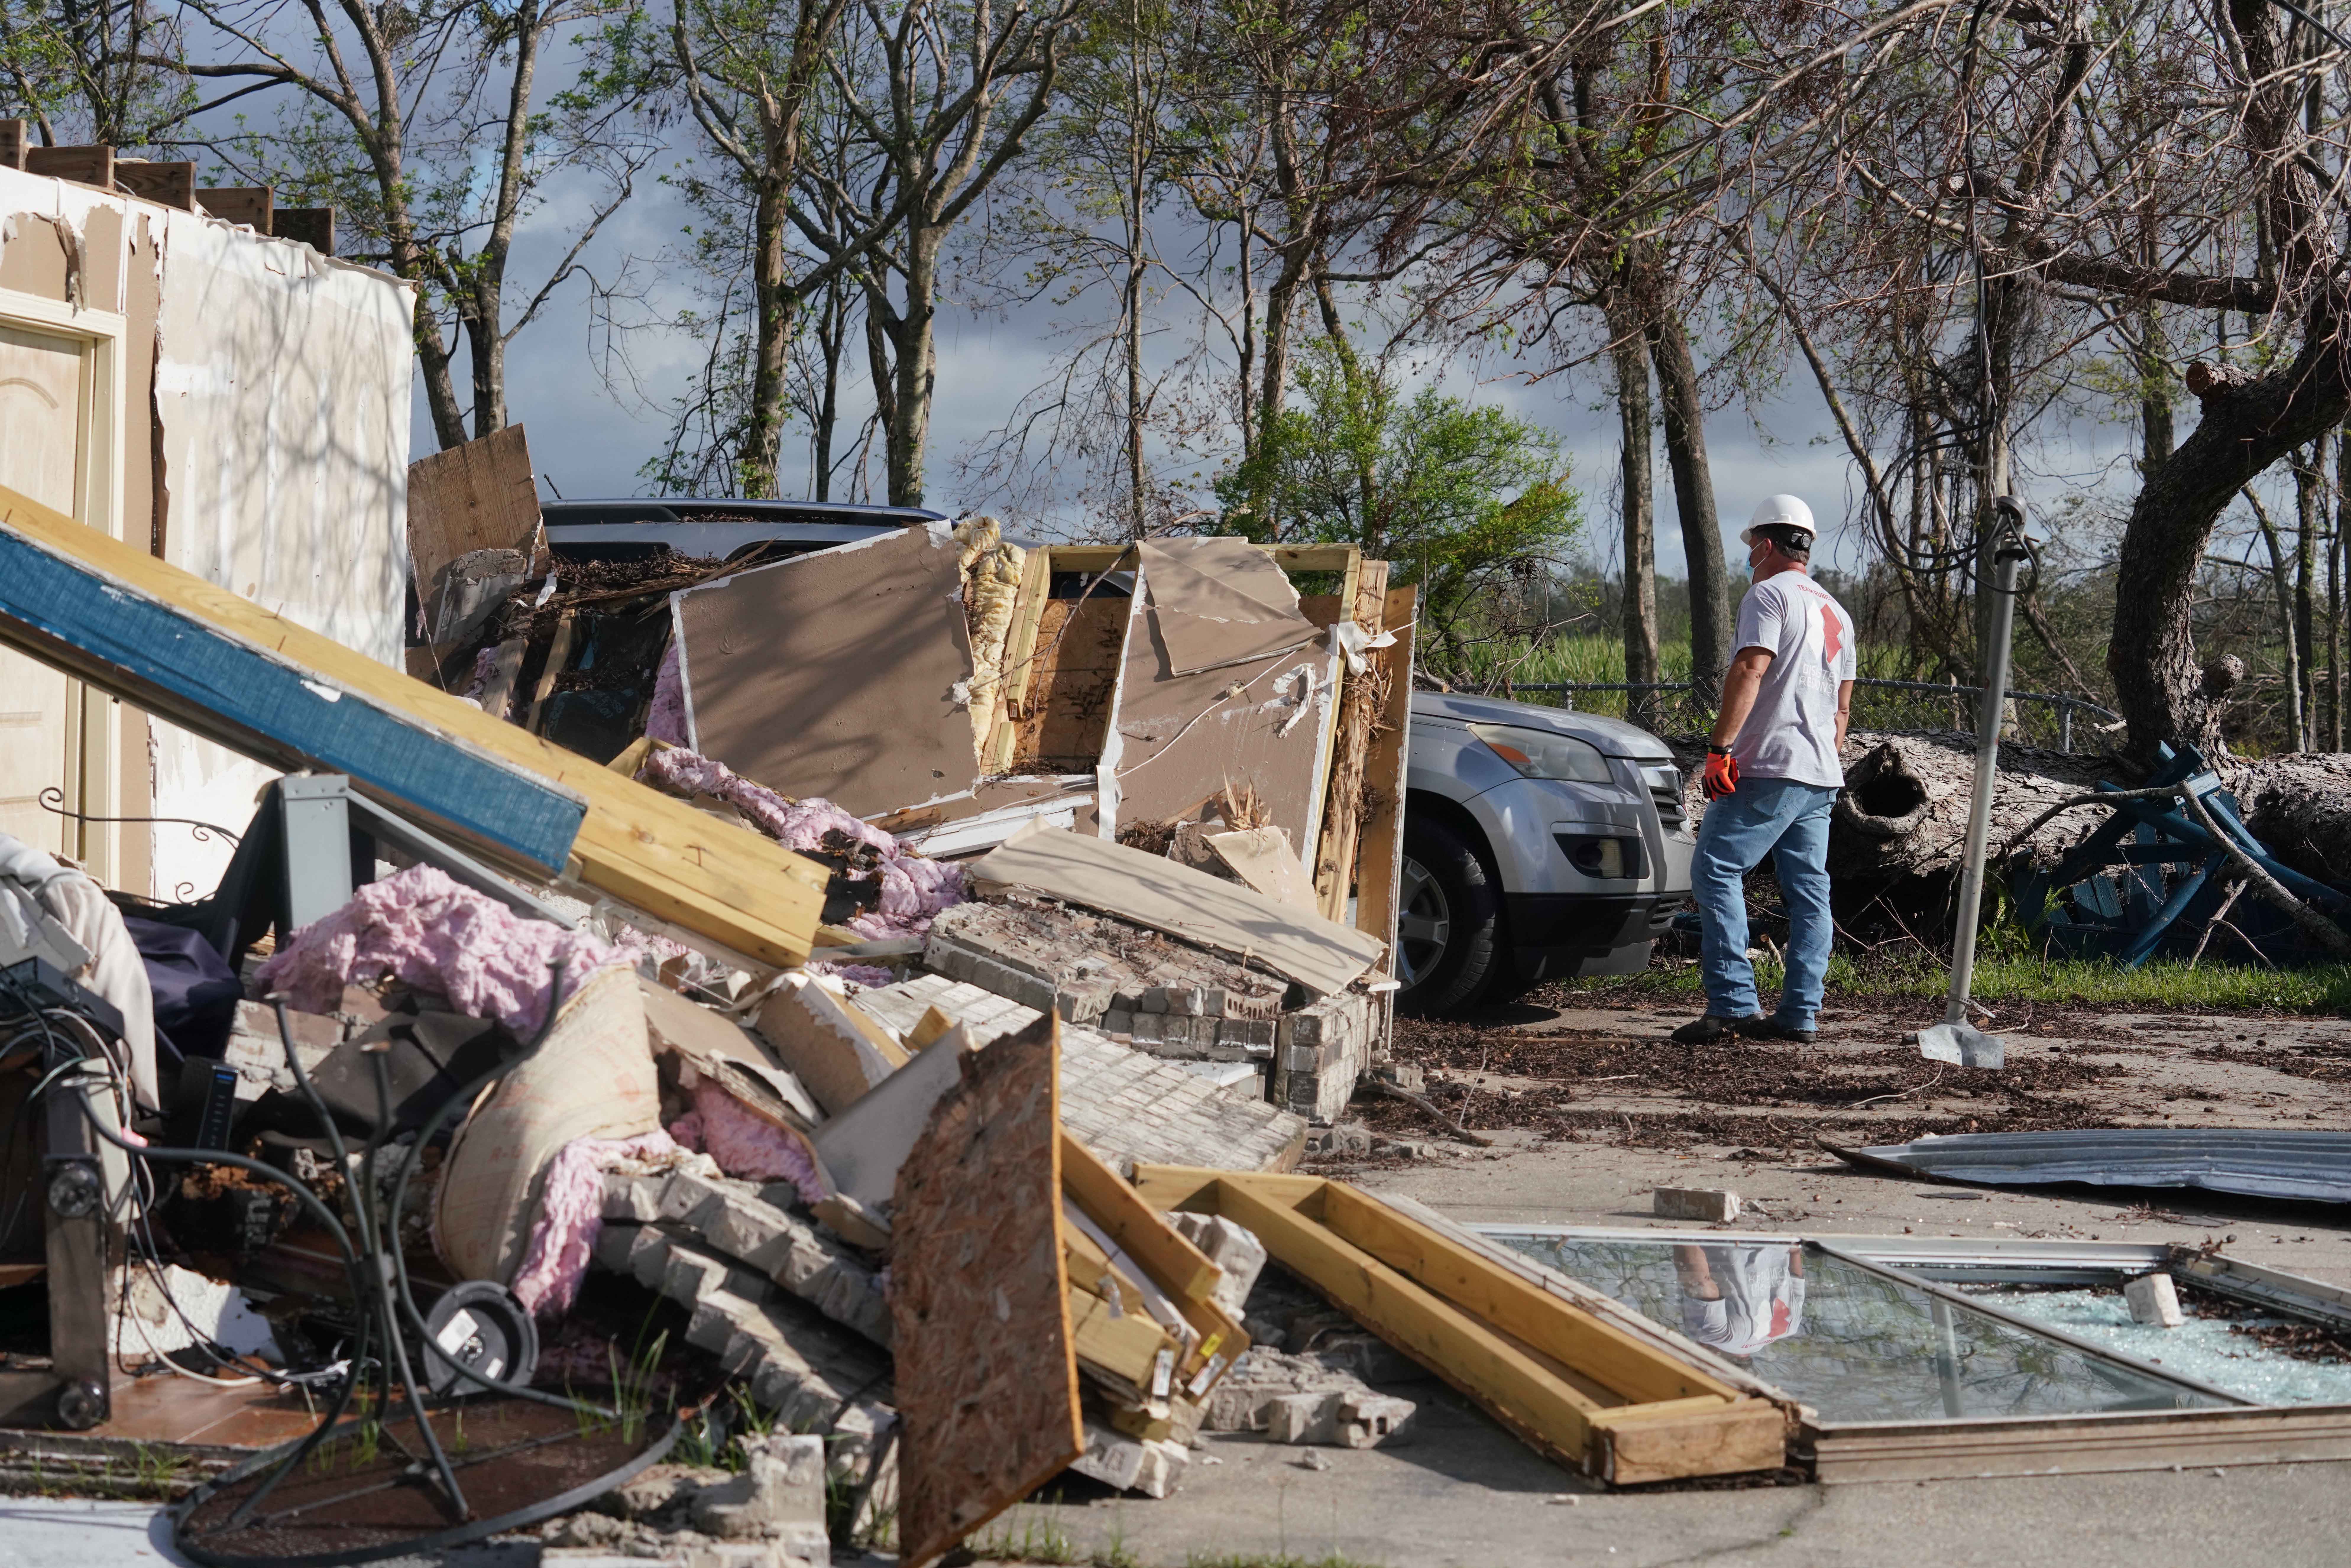 Members from Team Rubicon Disaster Response Team assess damage caused by Hurricane Ida.